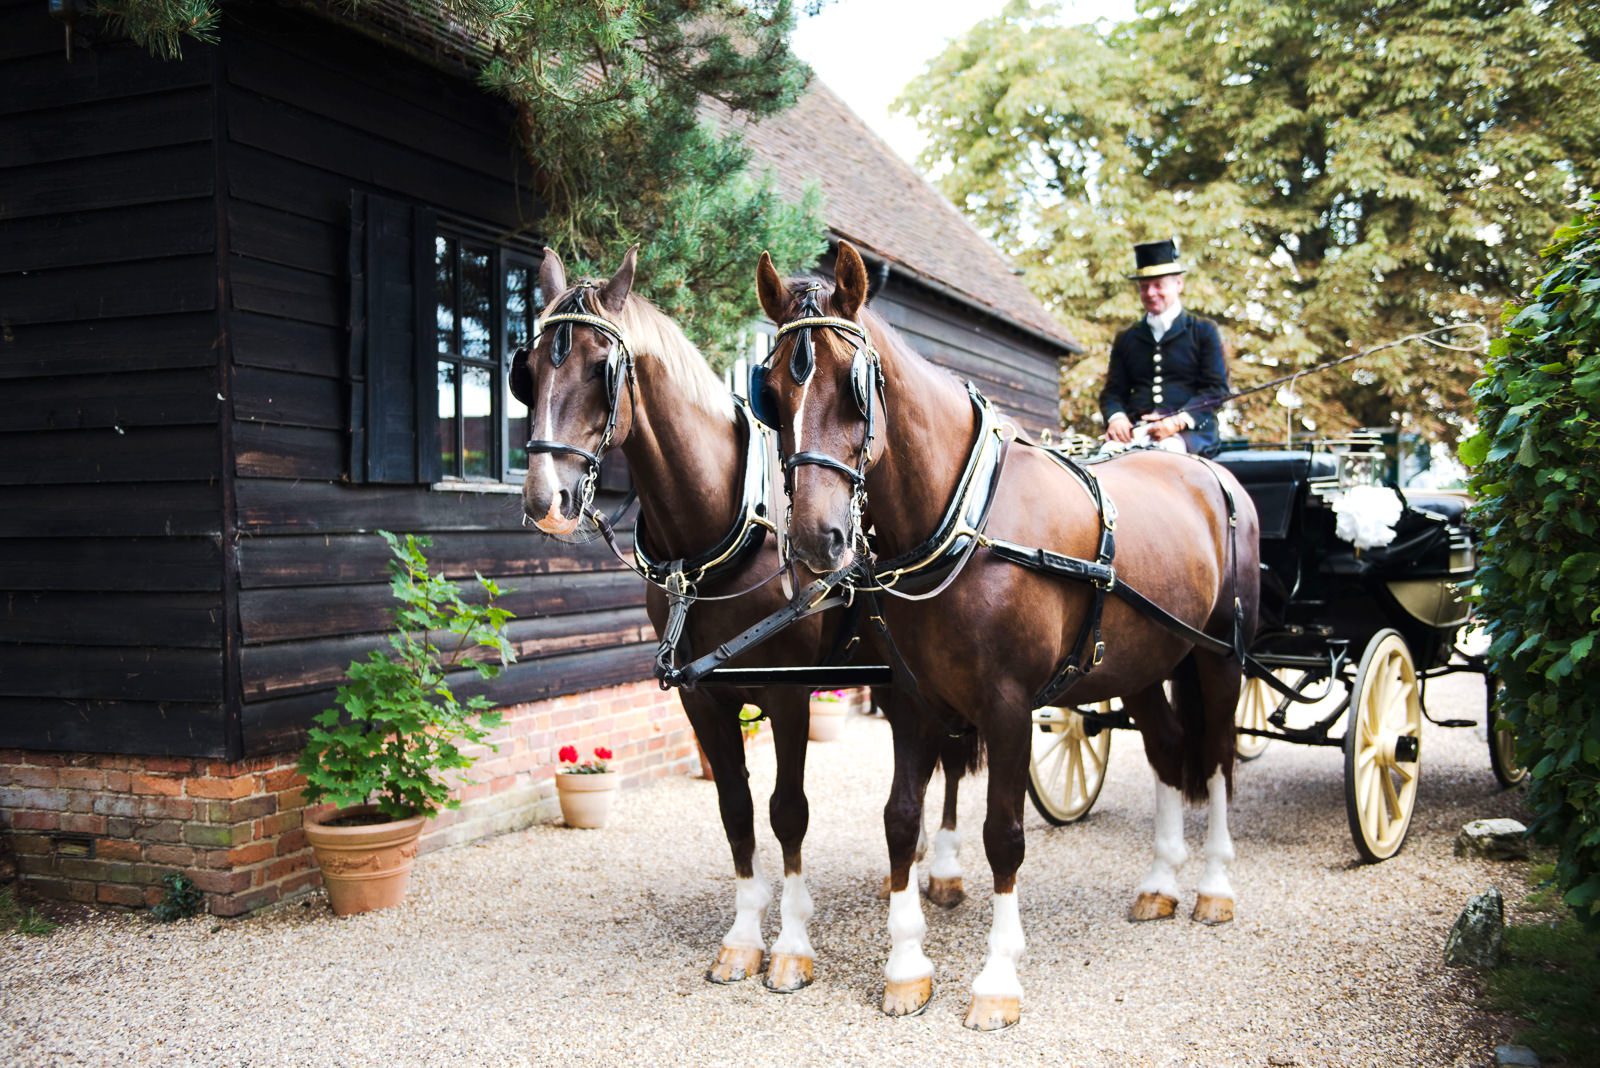 Gorgeous wedding coach and horses wait for the bride and her father to take them to church.